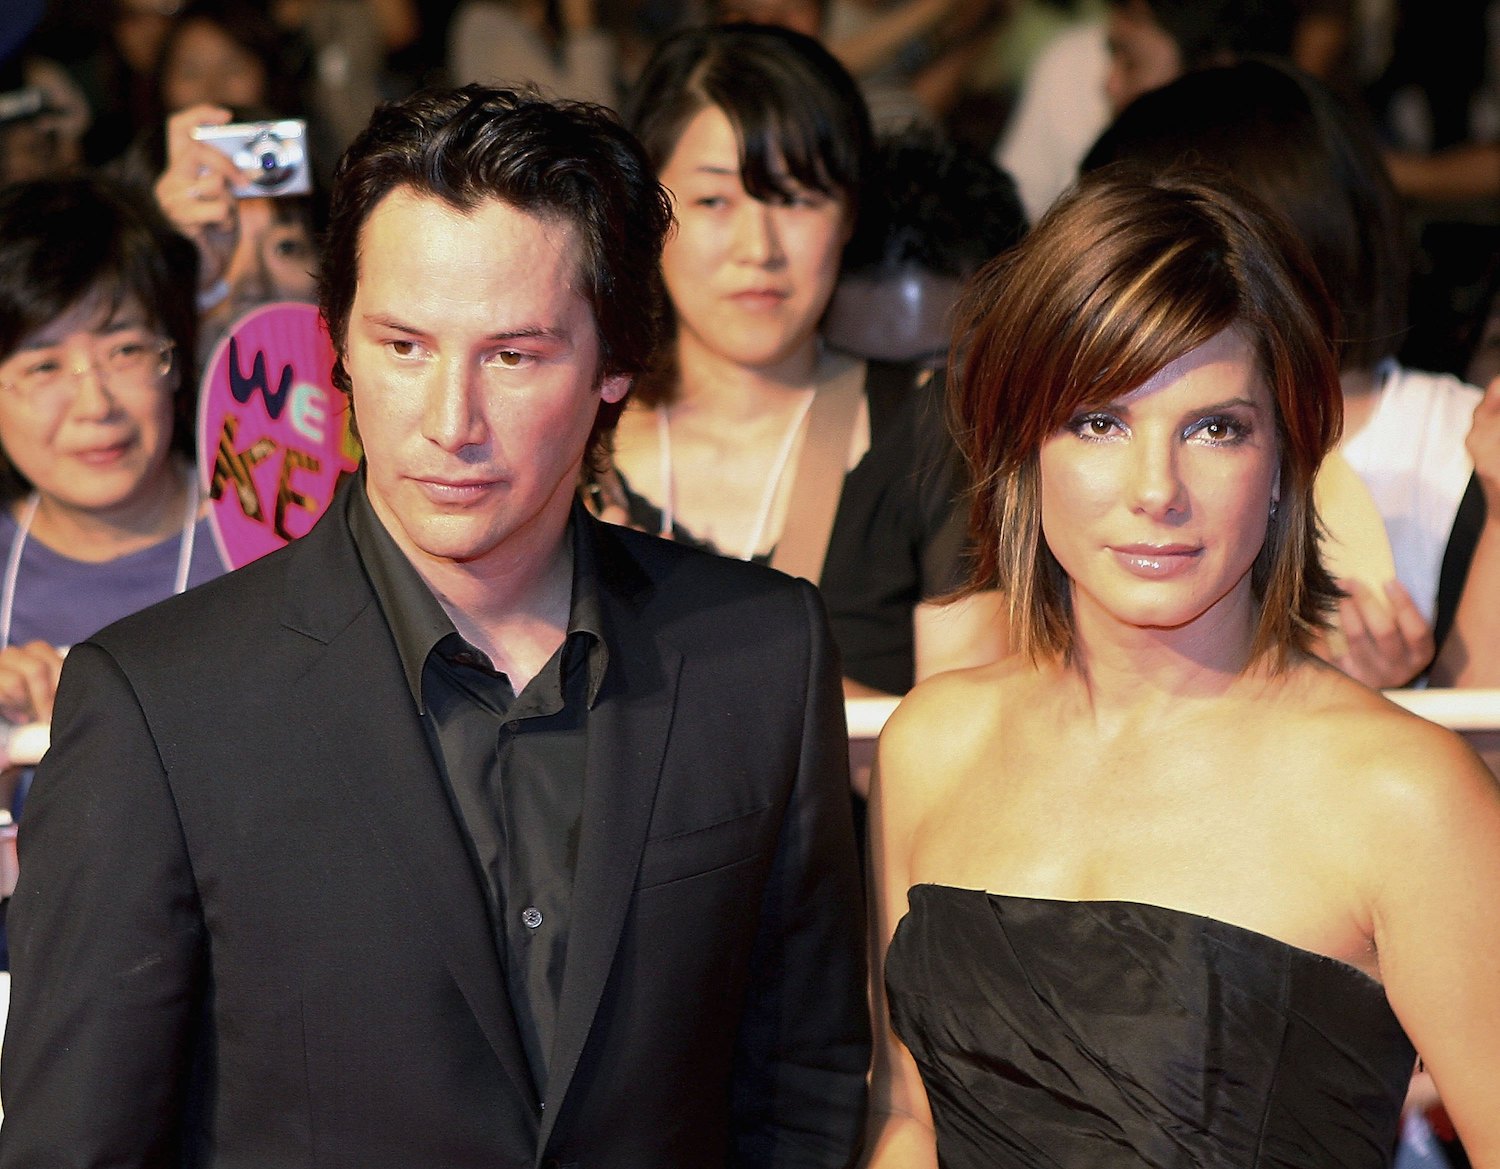 Keanu Reeves and Sandra Bullock, both in black, look serious on the red carpet at the Japanese premiere of 'The Lake House'